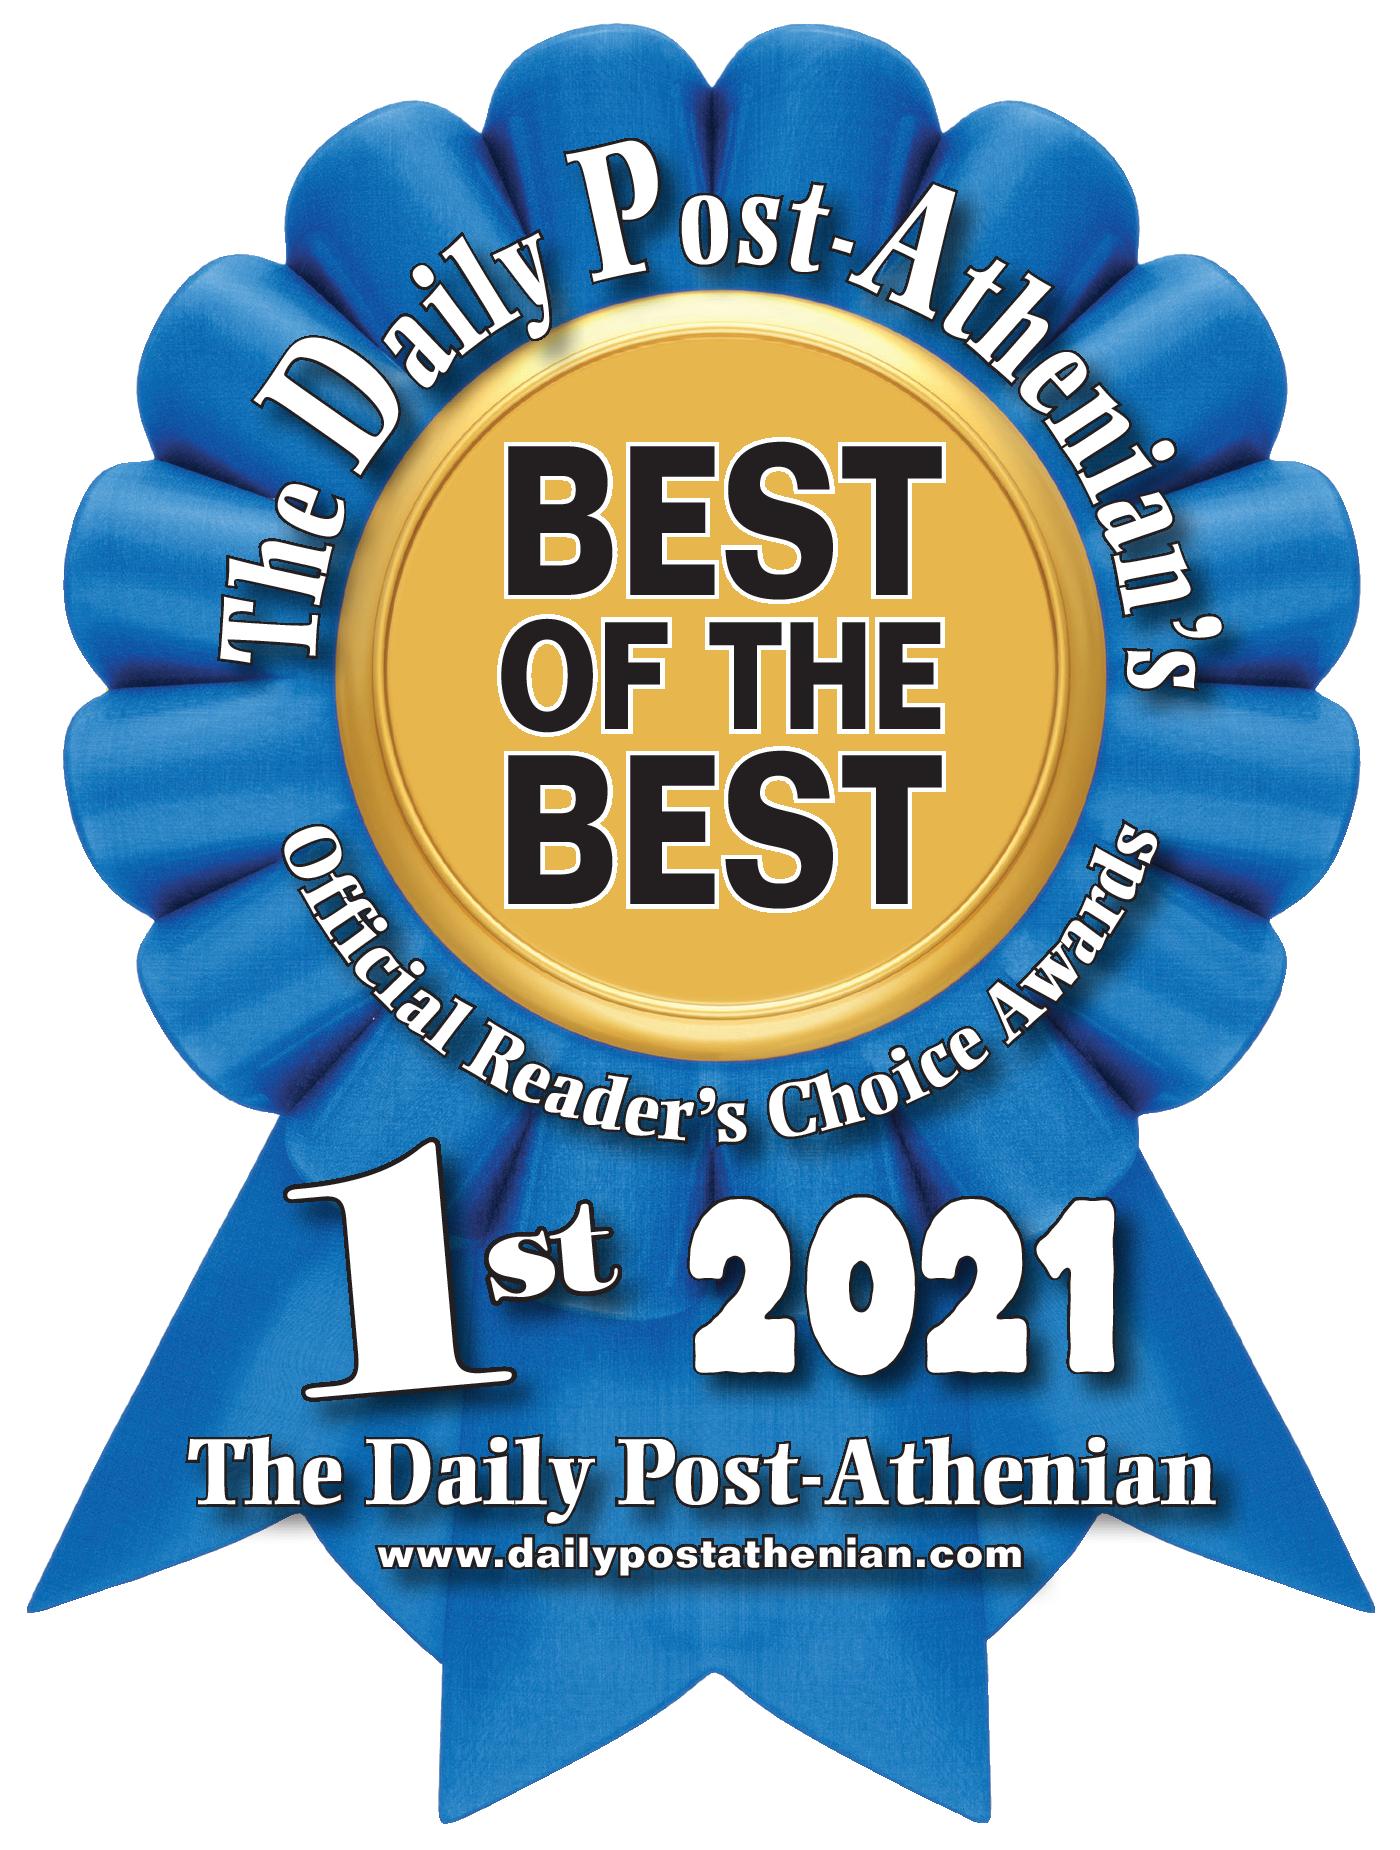 Daily Post Athenian Best of the Best 1st Place Ribbon 2021